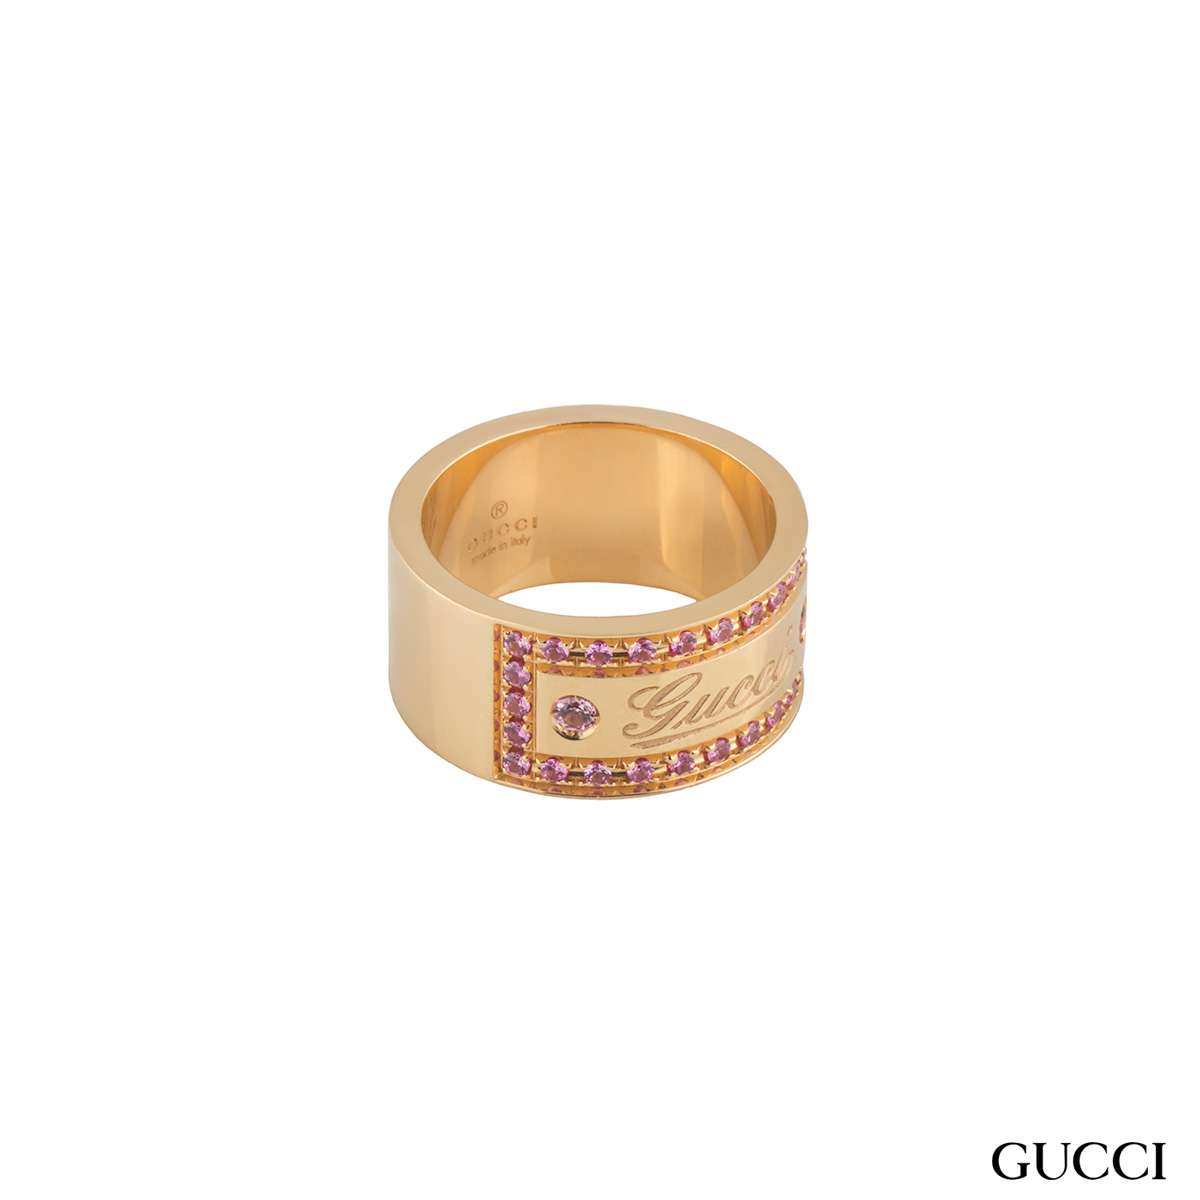 Gucci Rose Gold Pink Spinel Band Ring